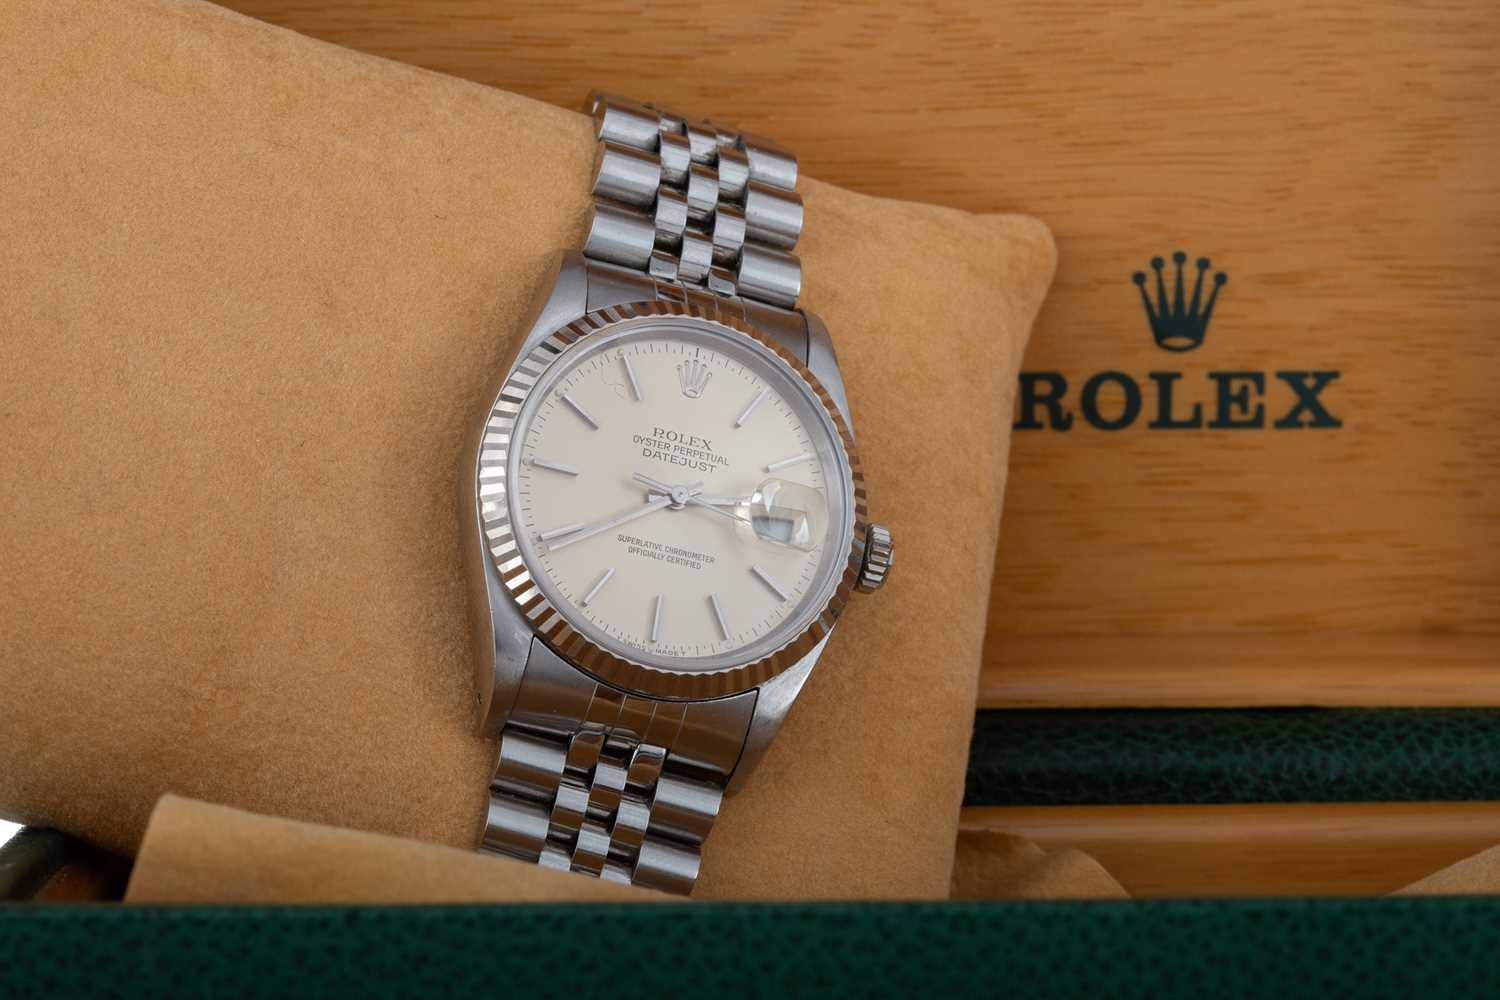 ROLEX OYSTER PERPETUAL STAINLESS STEEL AUTOMATIC WRIST WATCH, - Image 2 of 2